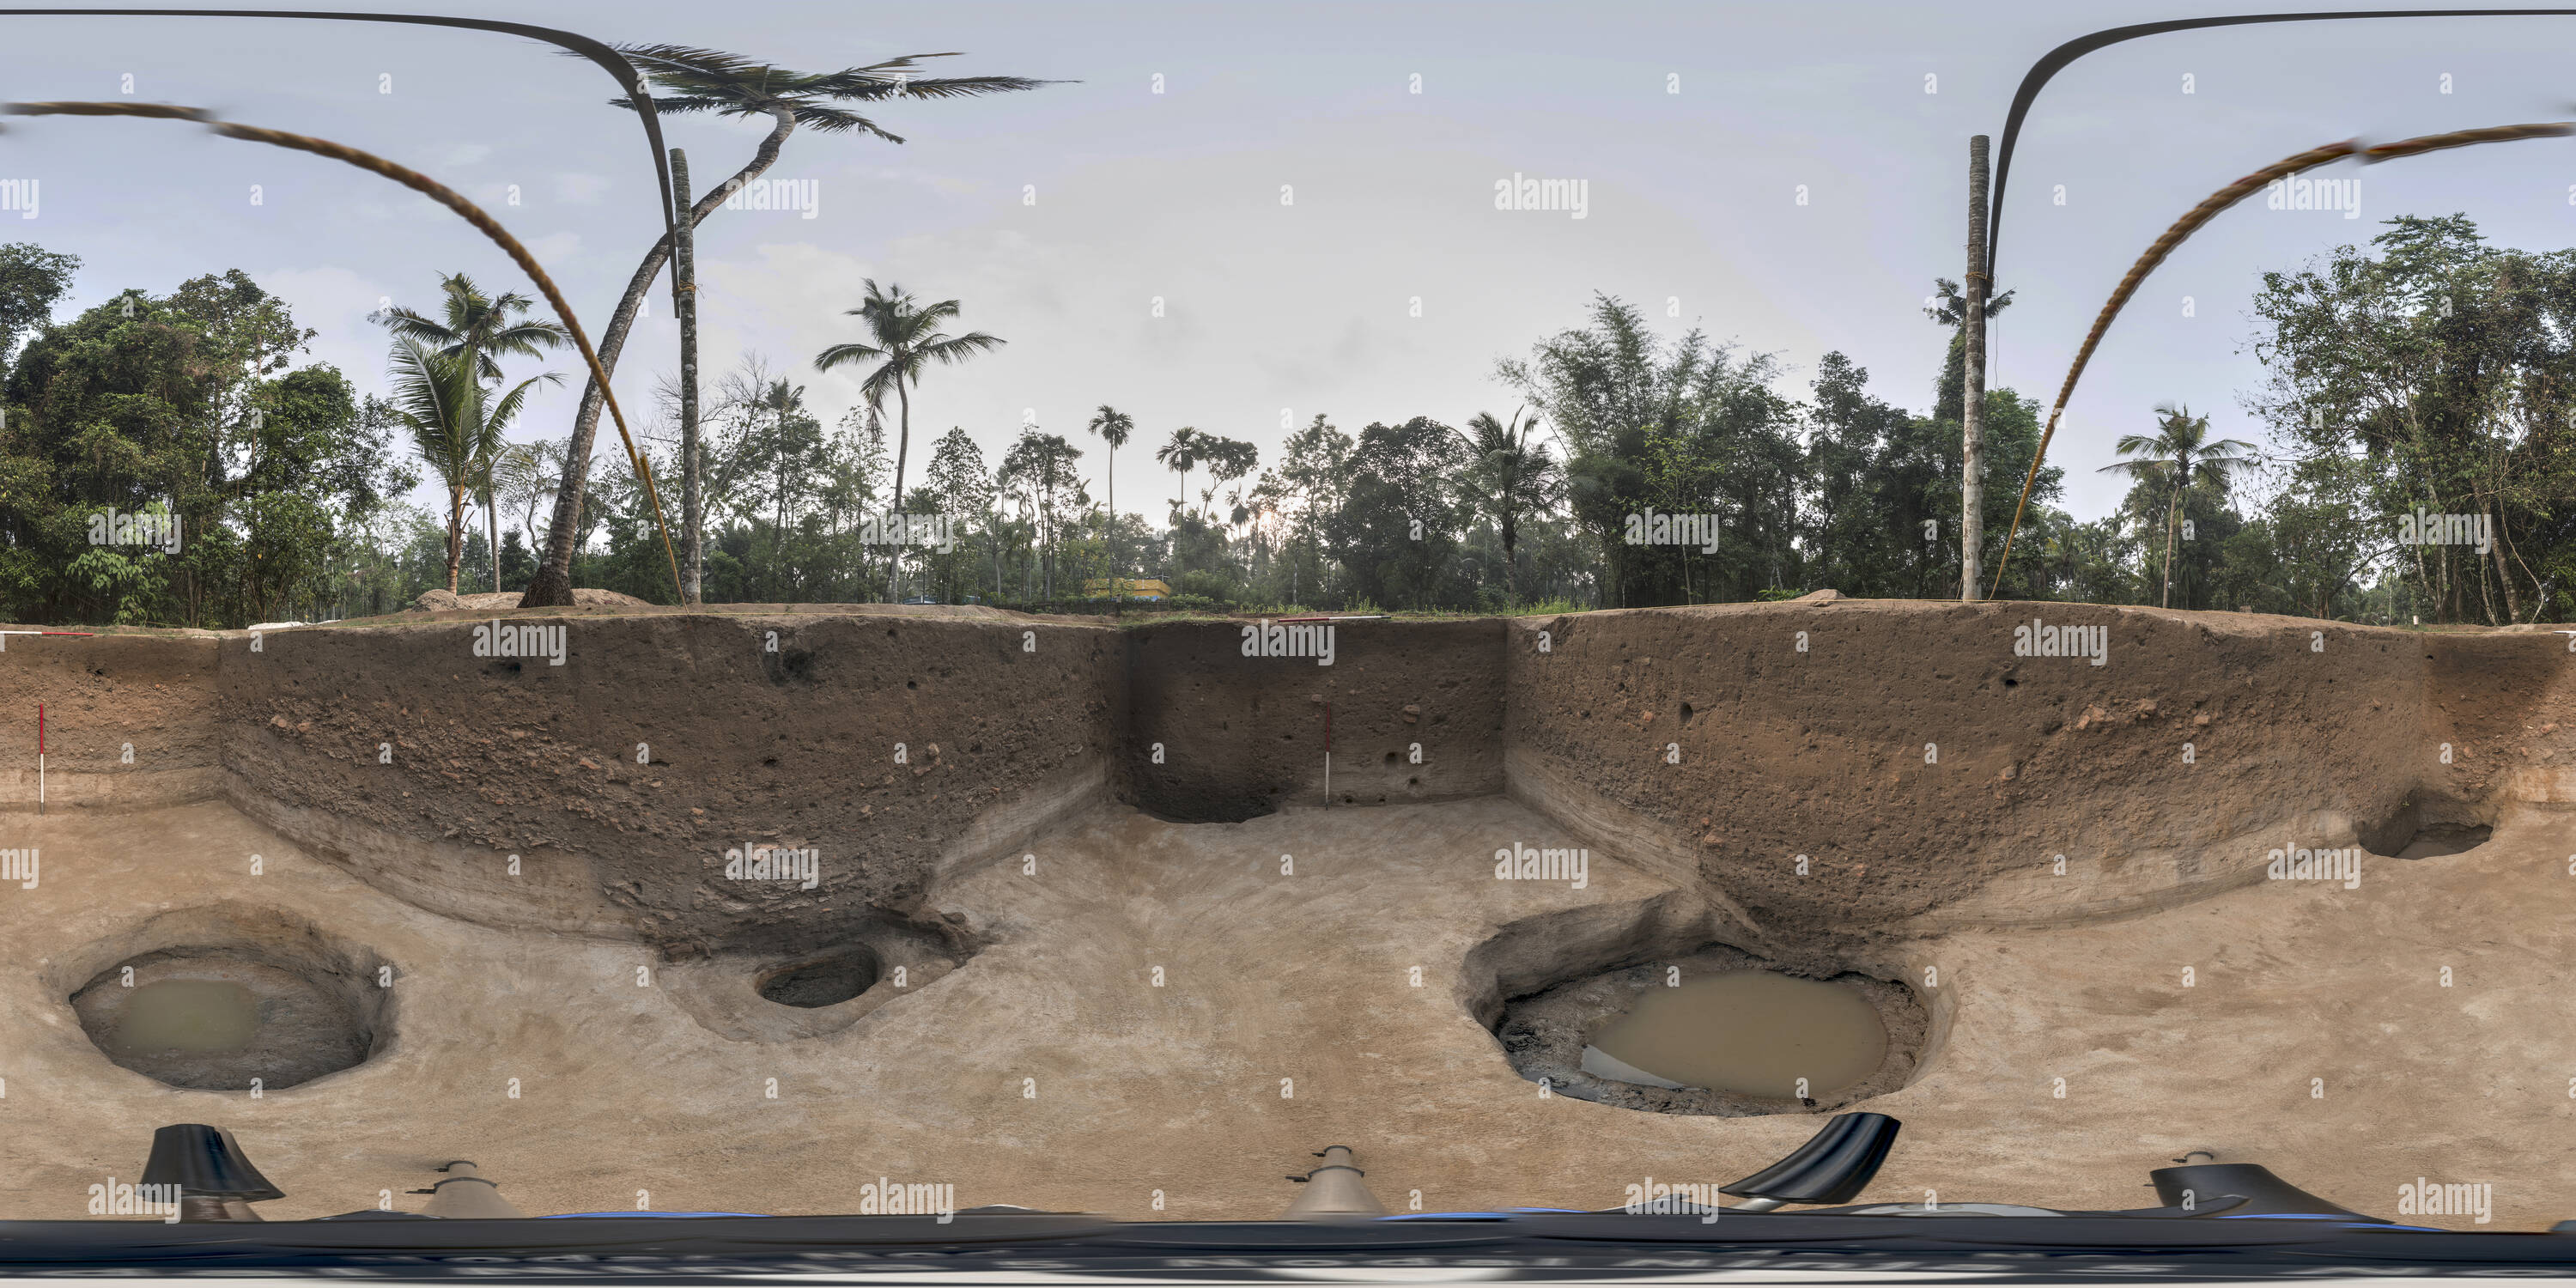 360 degree panoramic view of Archaeological Excavations at Pattanam 2014. TRENCH PT14 43-44 1